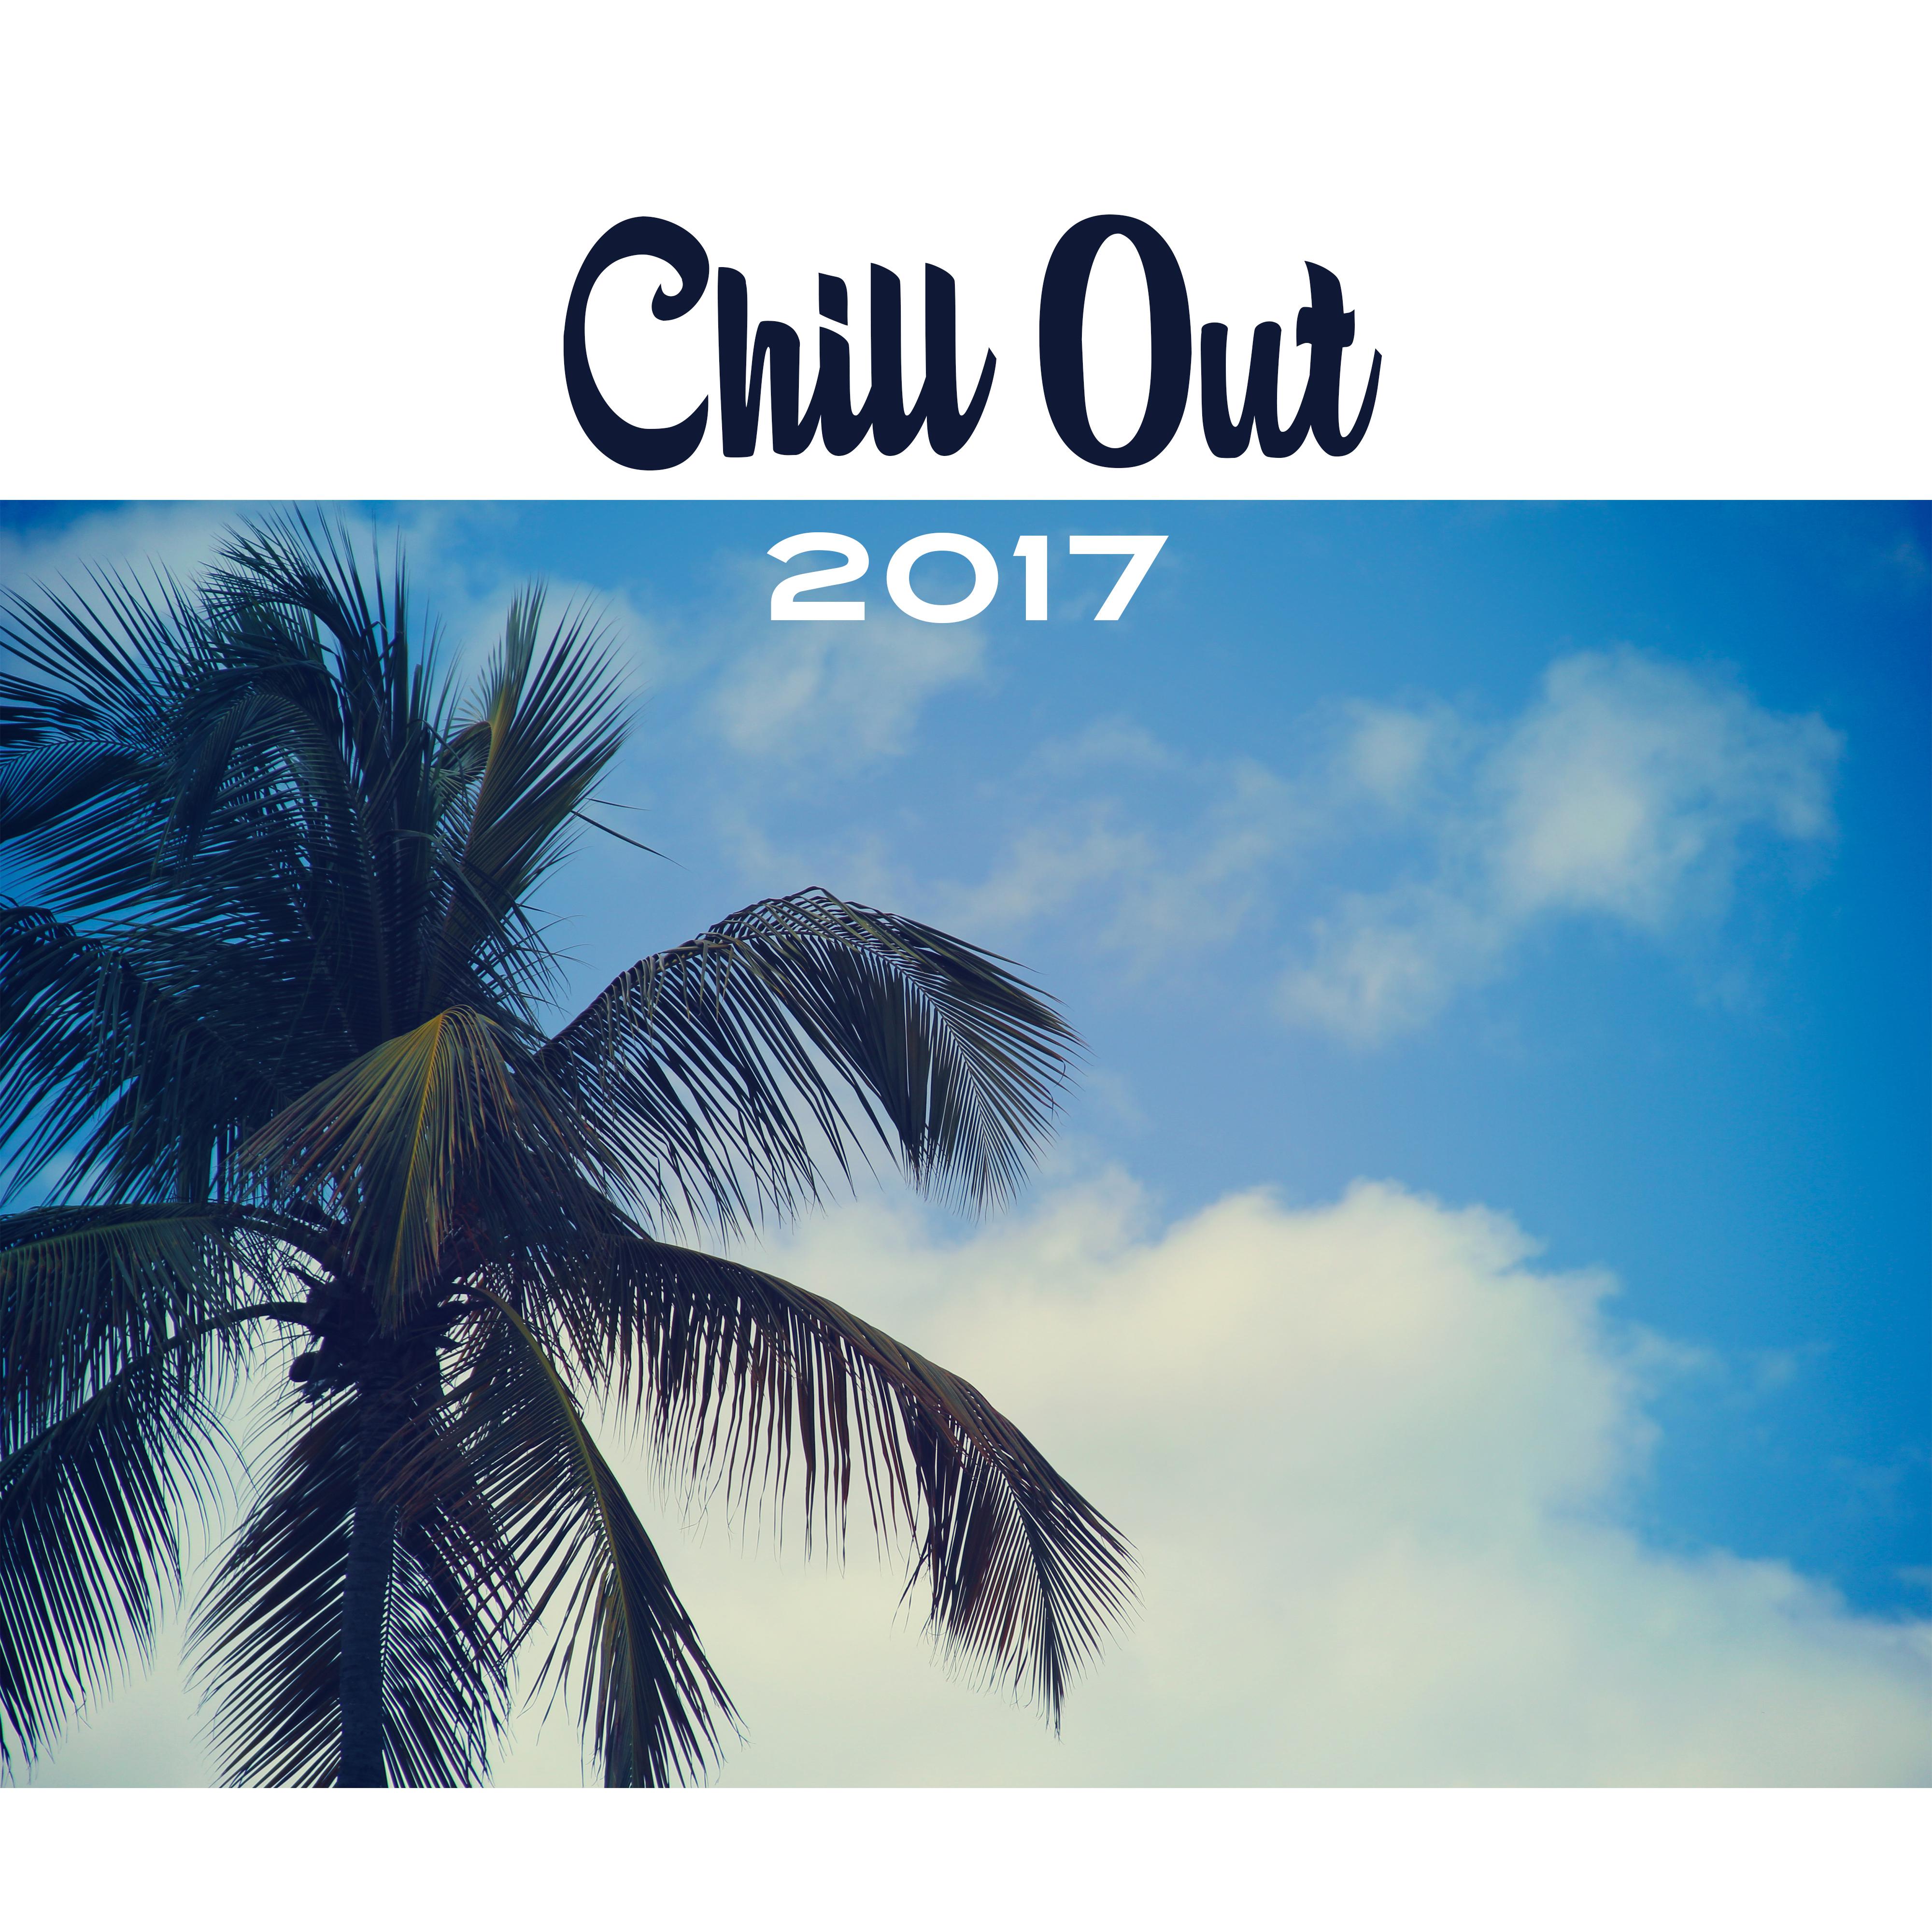 Chill Out 2017  Vibes, Beach Party, Summer Beats, Dance Floor, Ibiza Lounge, Total Relaxation